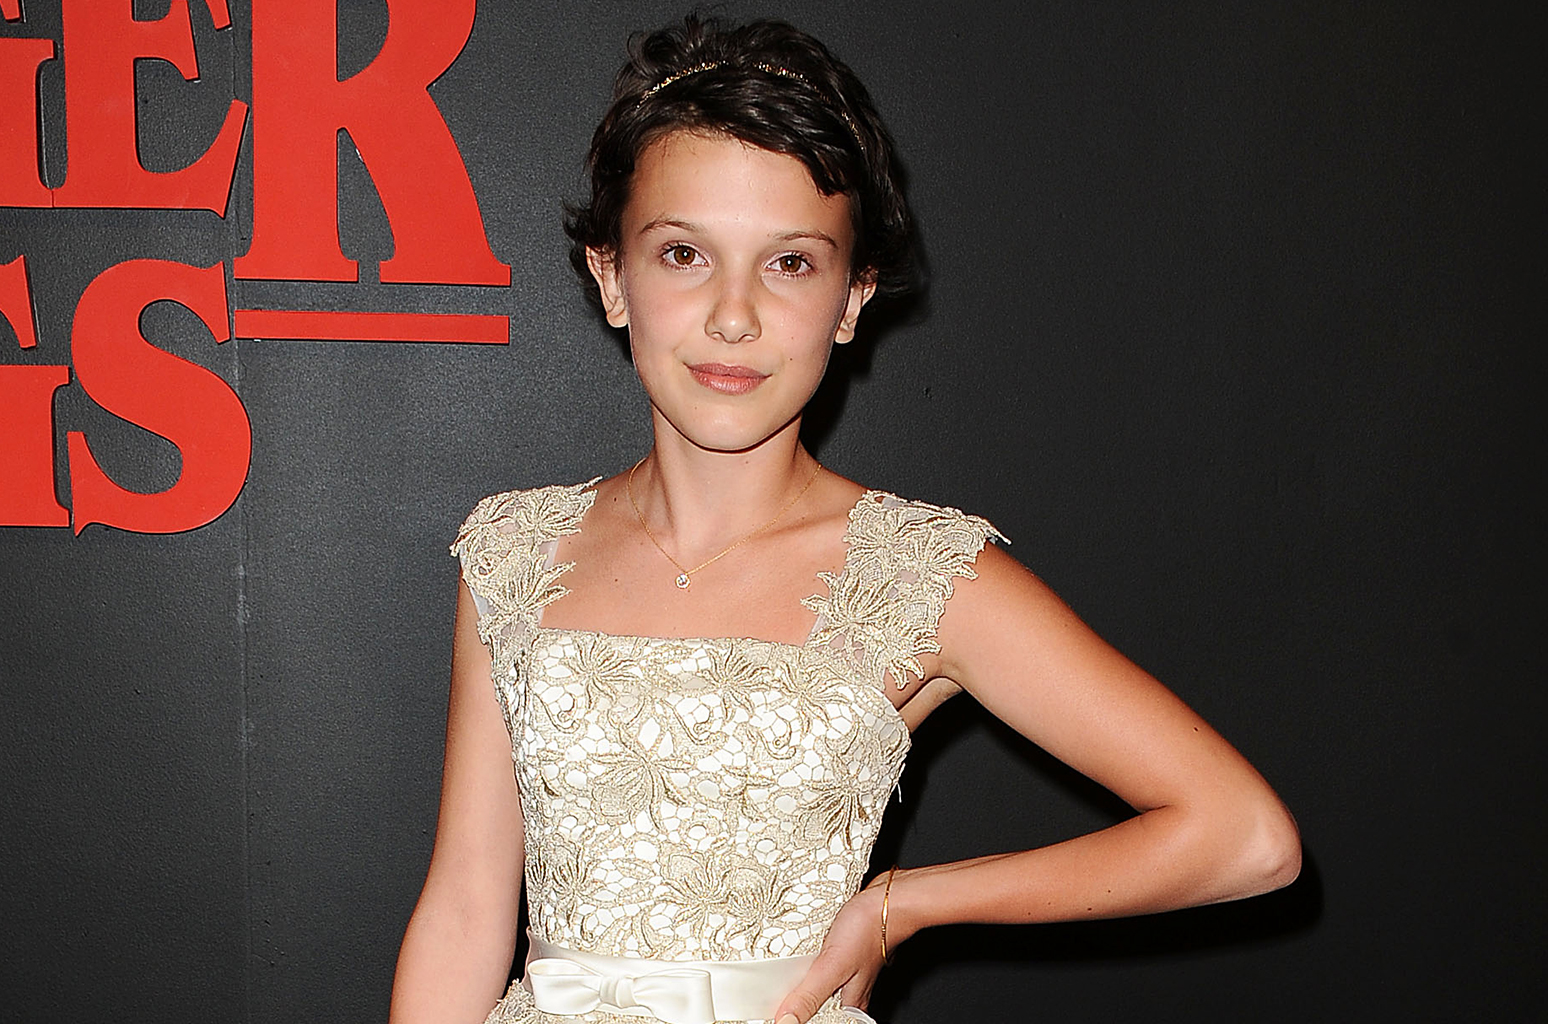 Millie Bobby Brown cast in Godzilla: King of the Monsters | Stranger Things